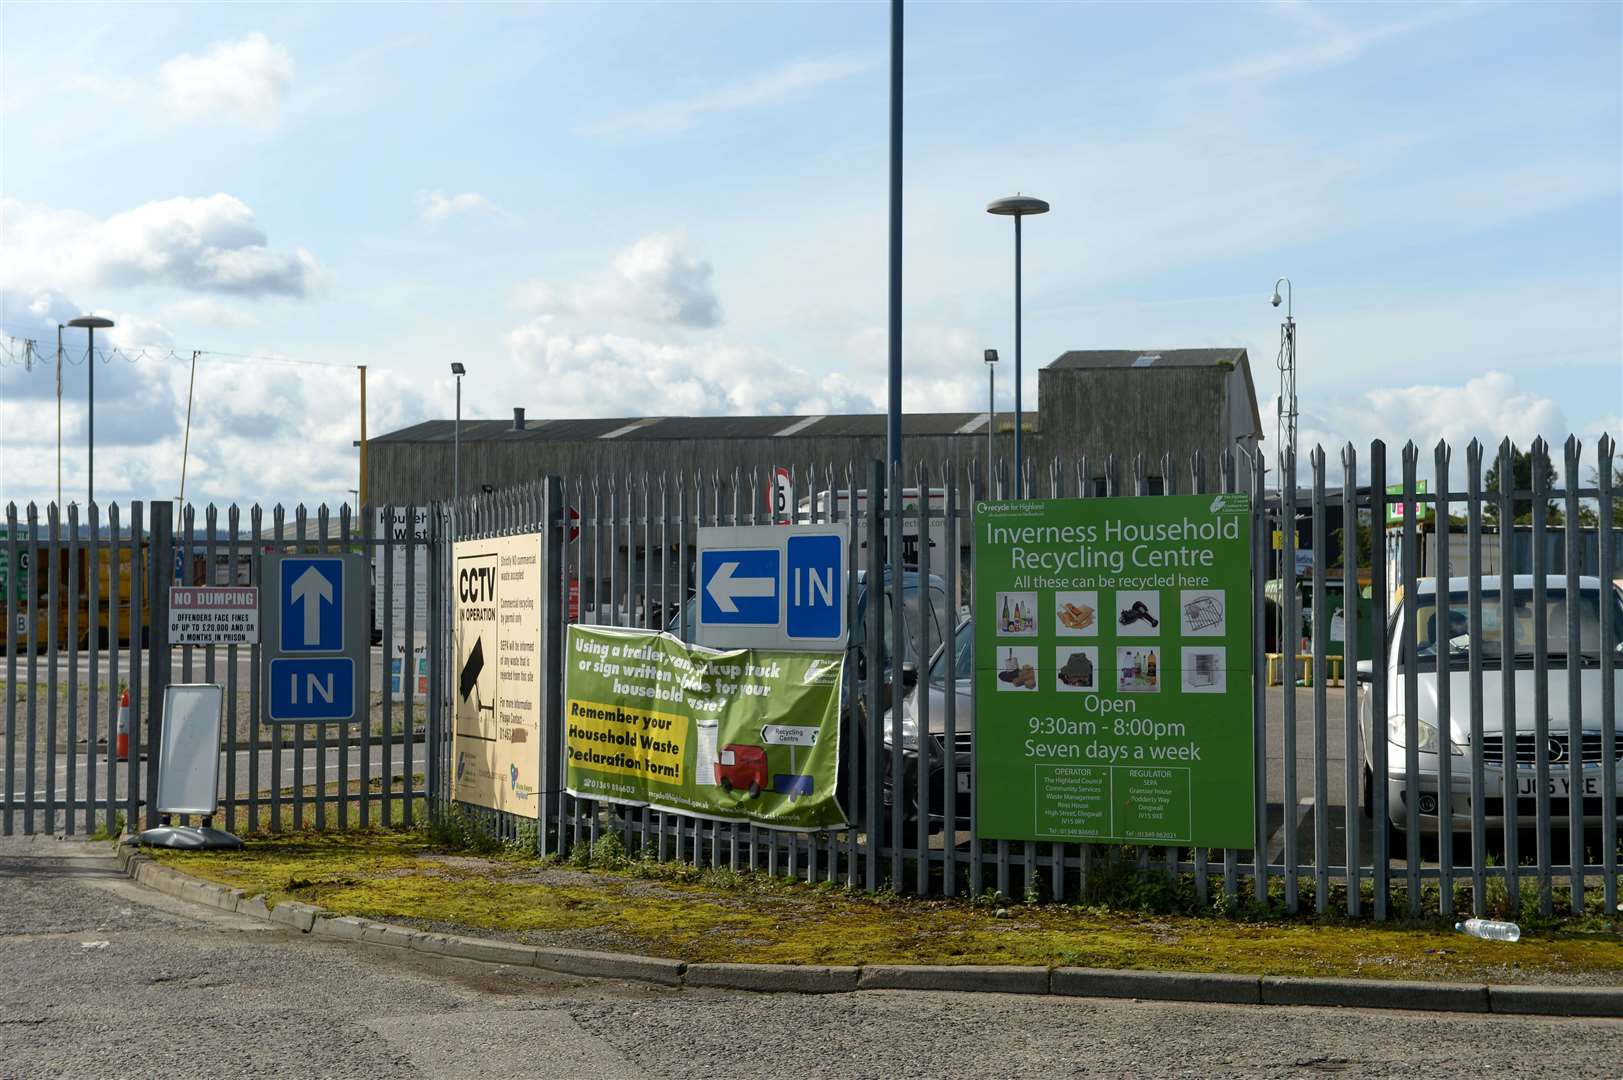 The recycling centre in Inverness.